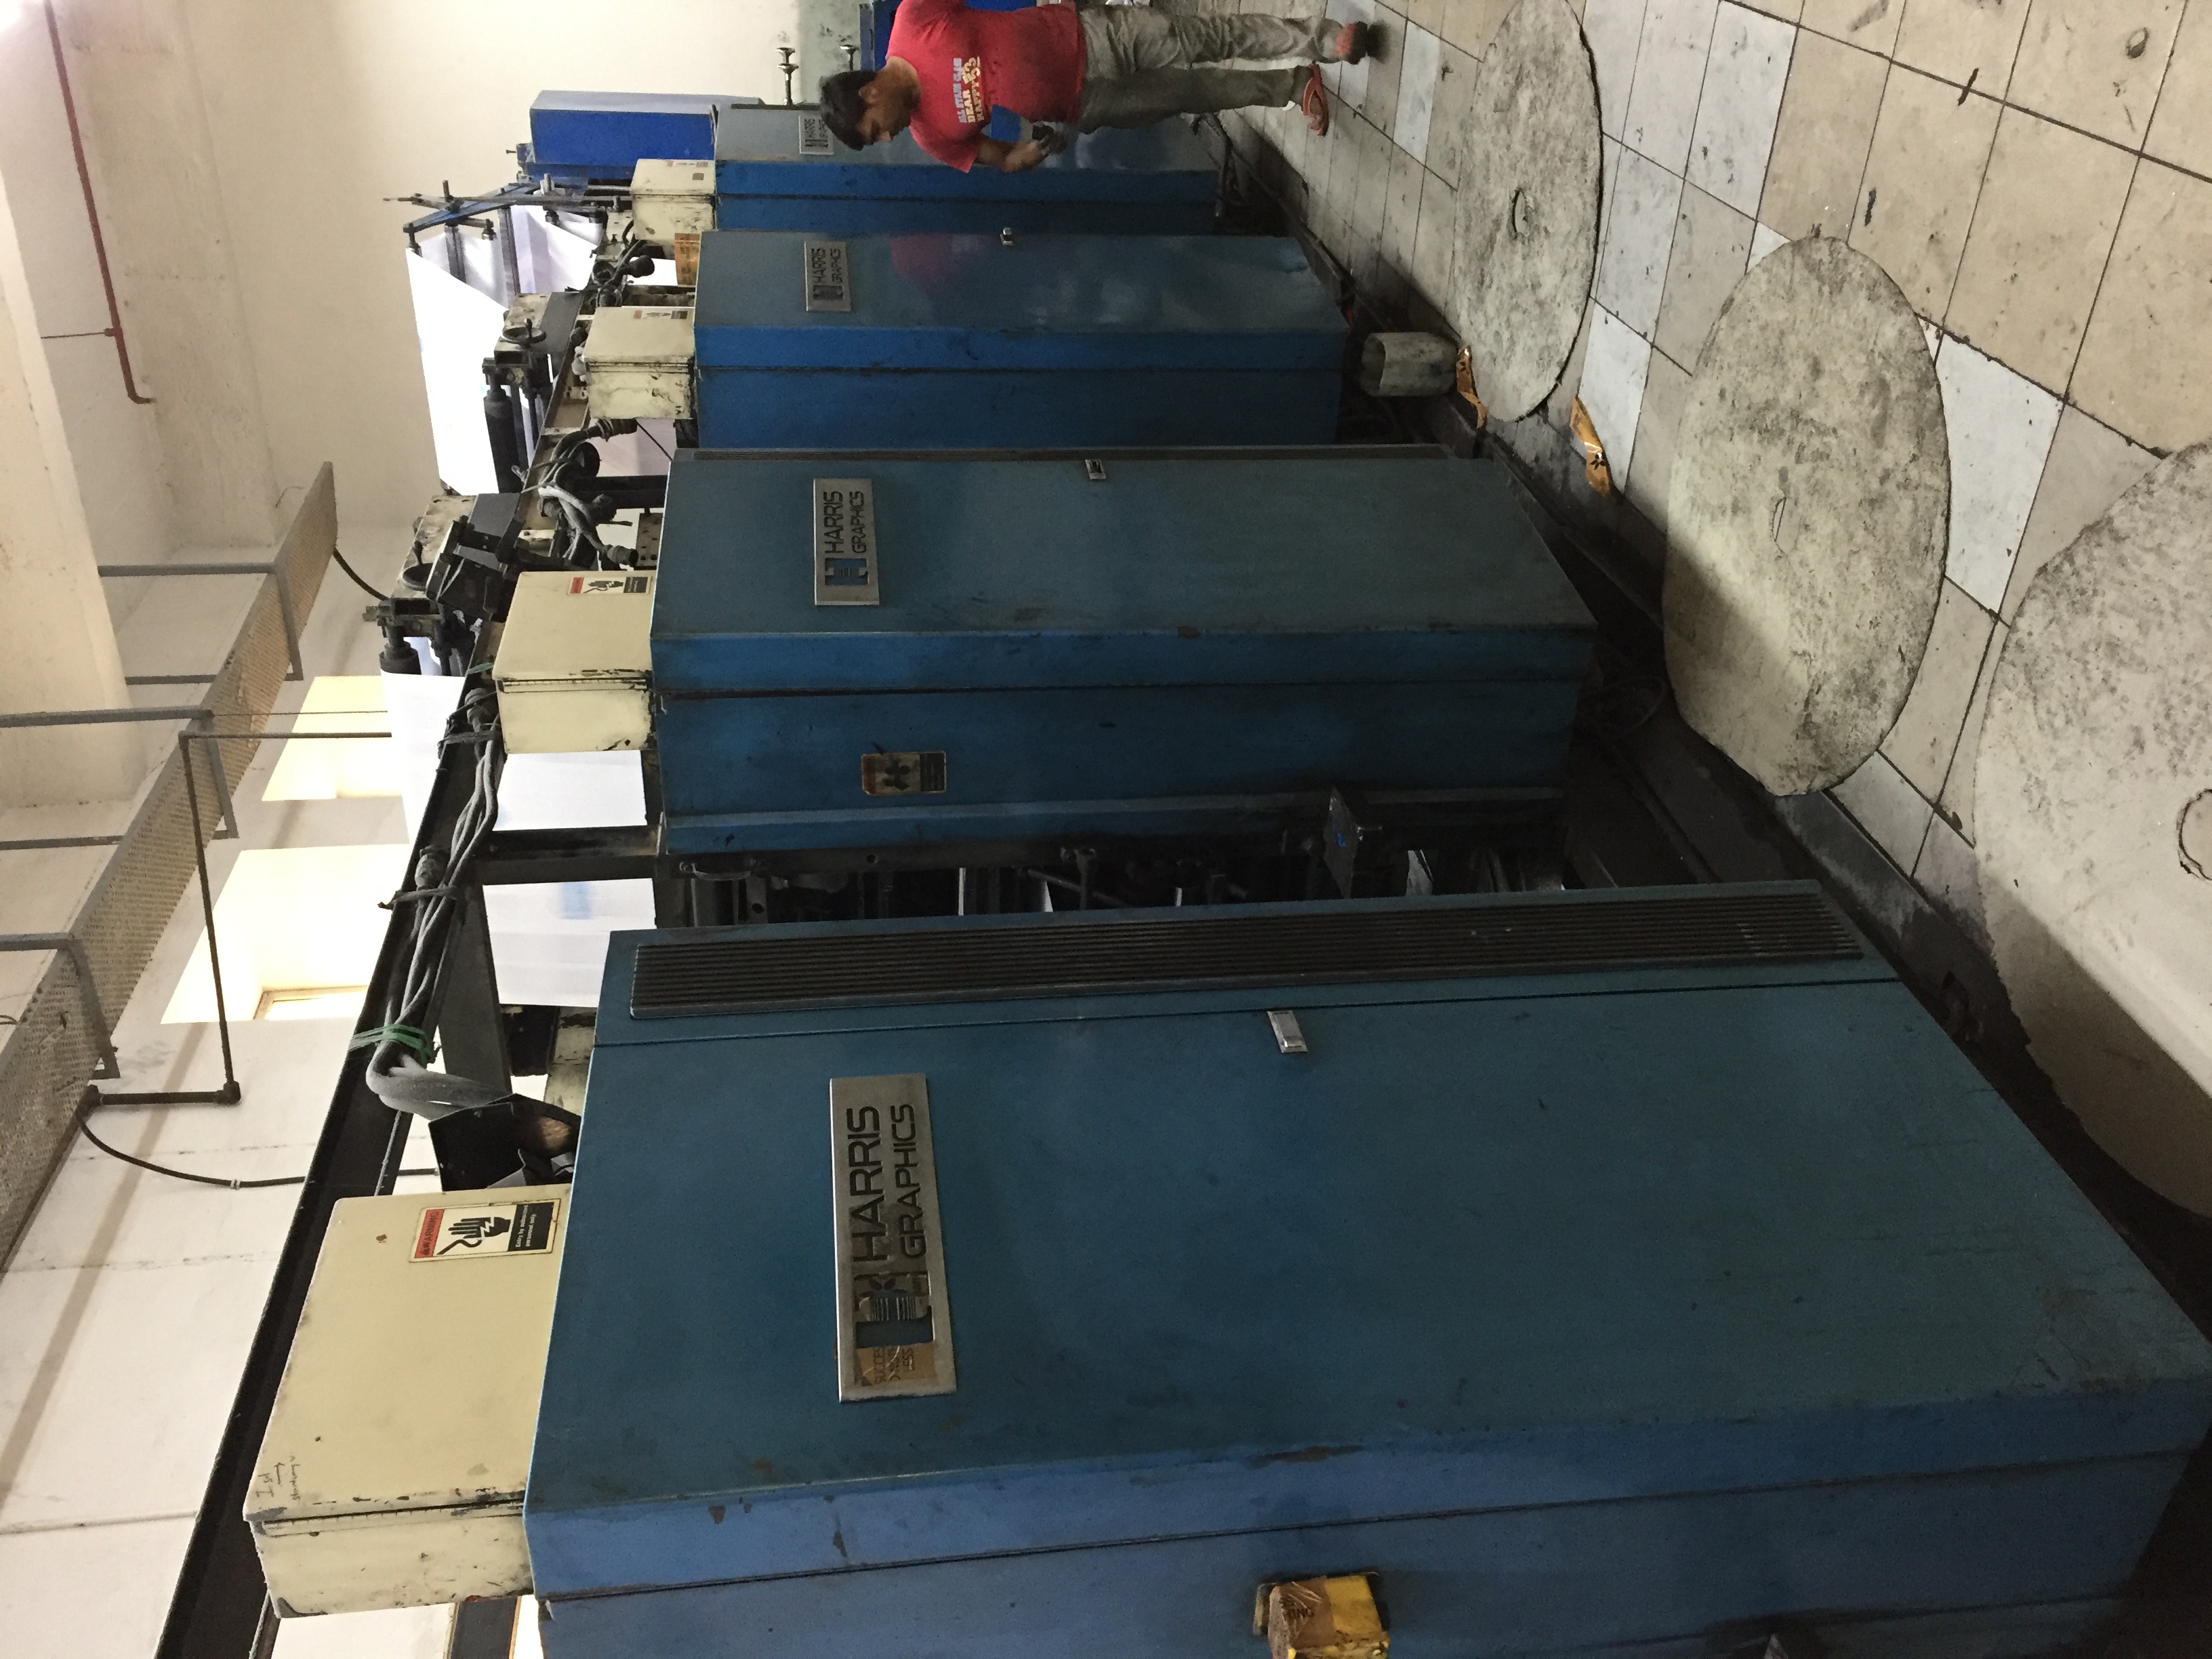 Harris NC400 Newspaper / Coldset Used Machinery for sale